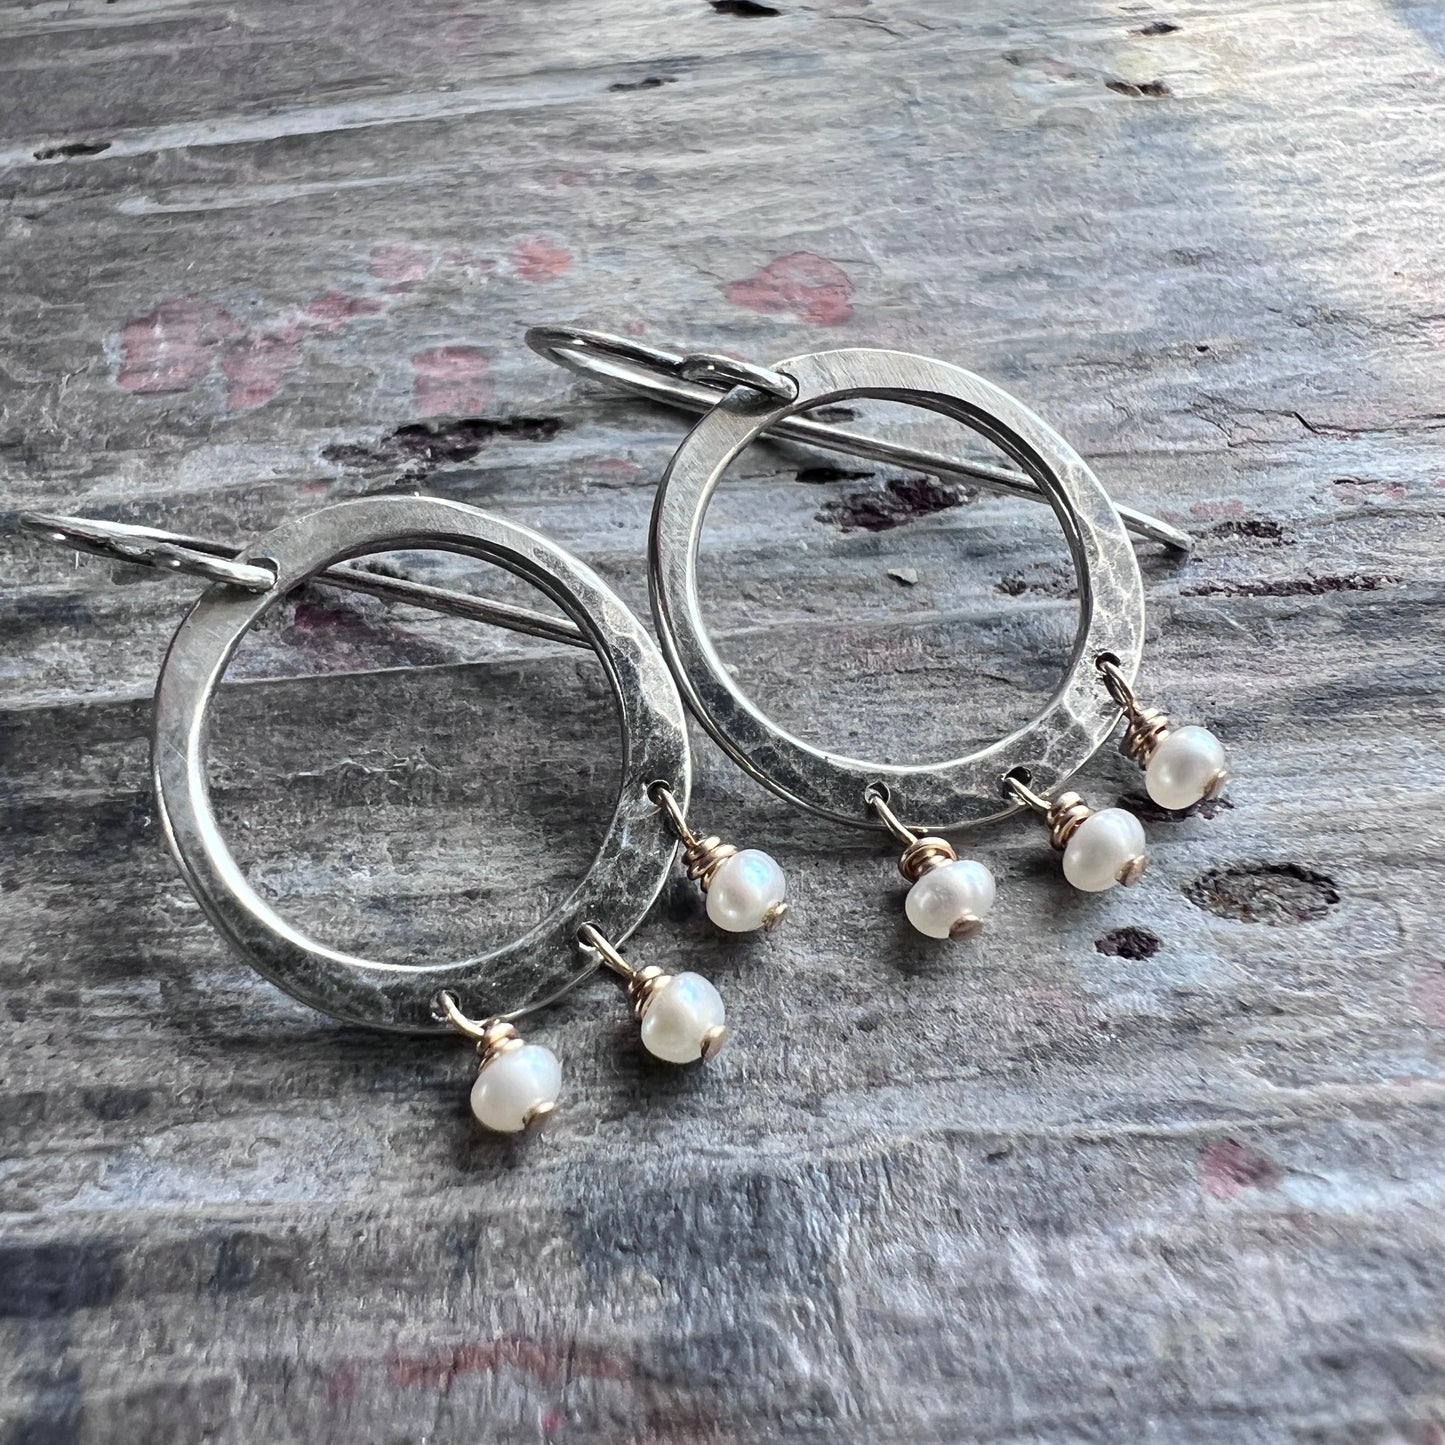 Sterling Silver and 14k Goldfill Pearl Earrings | Hammered Silver Hoops and Genuine Pearl Dangle Earrings